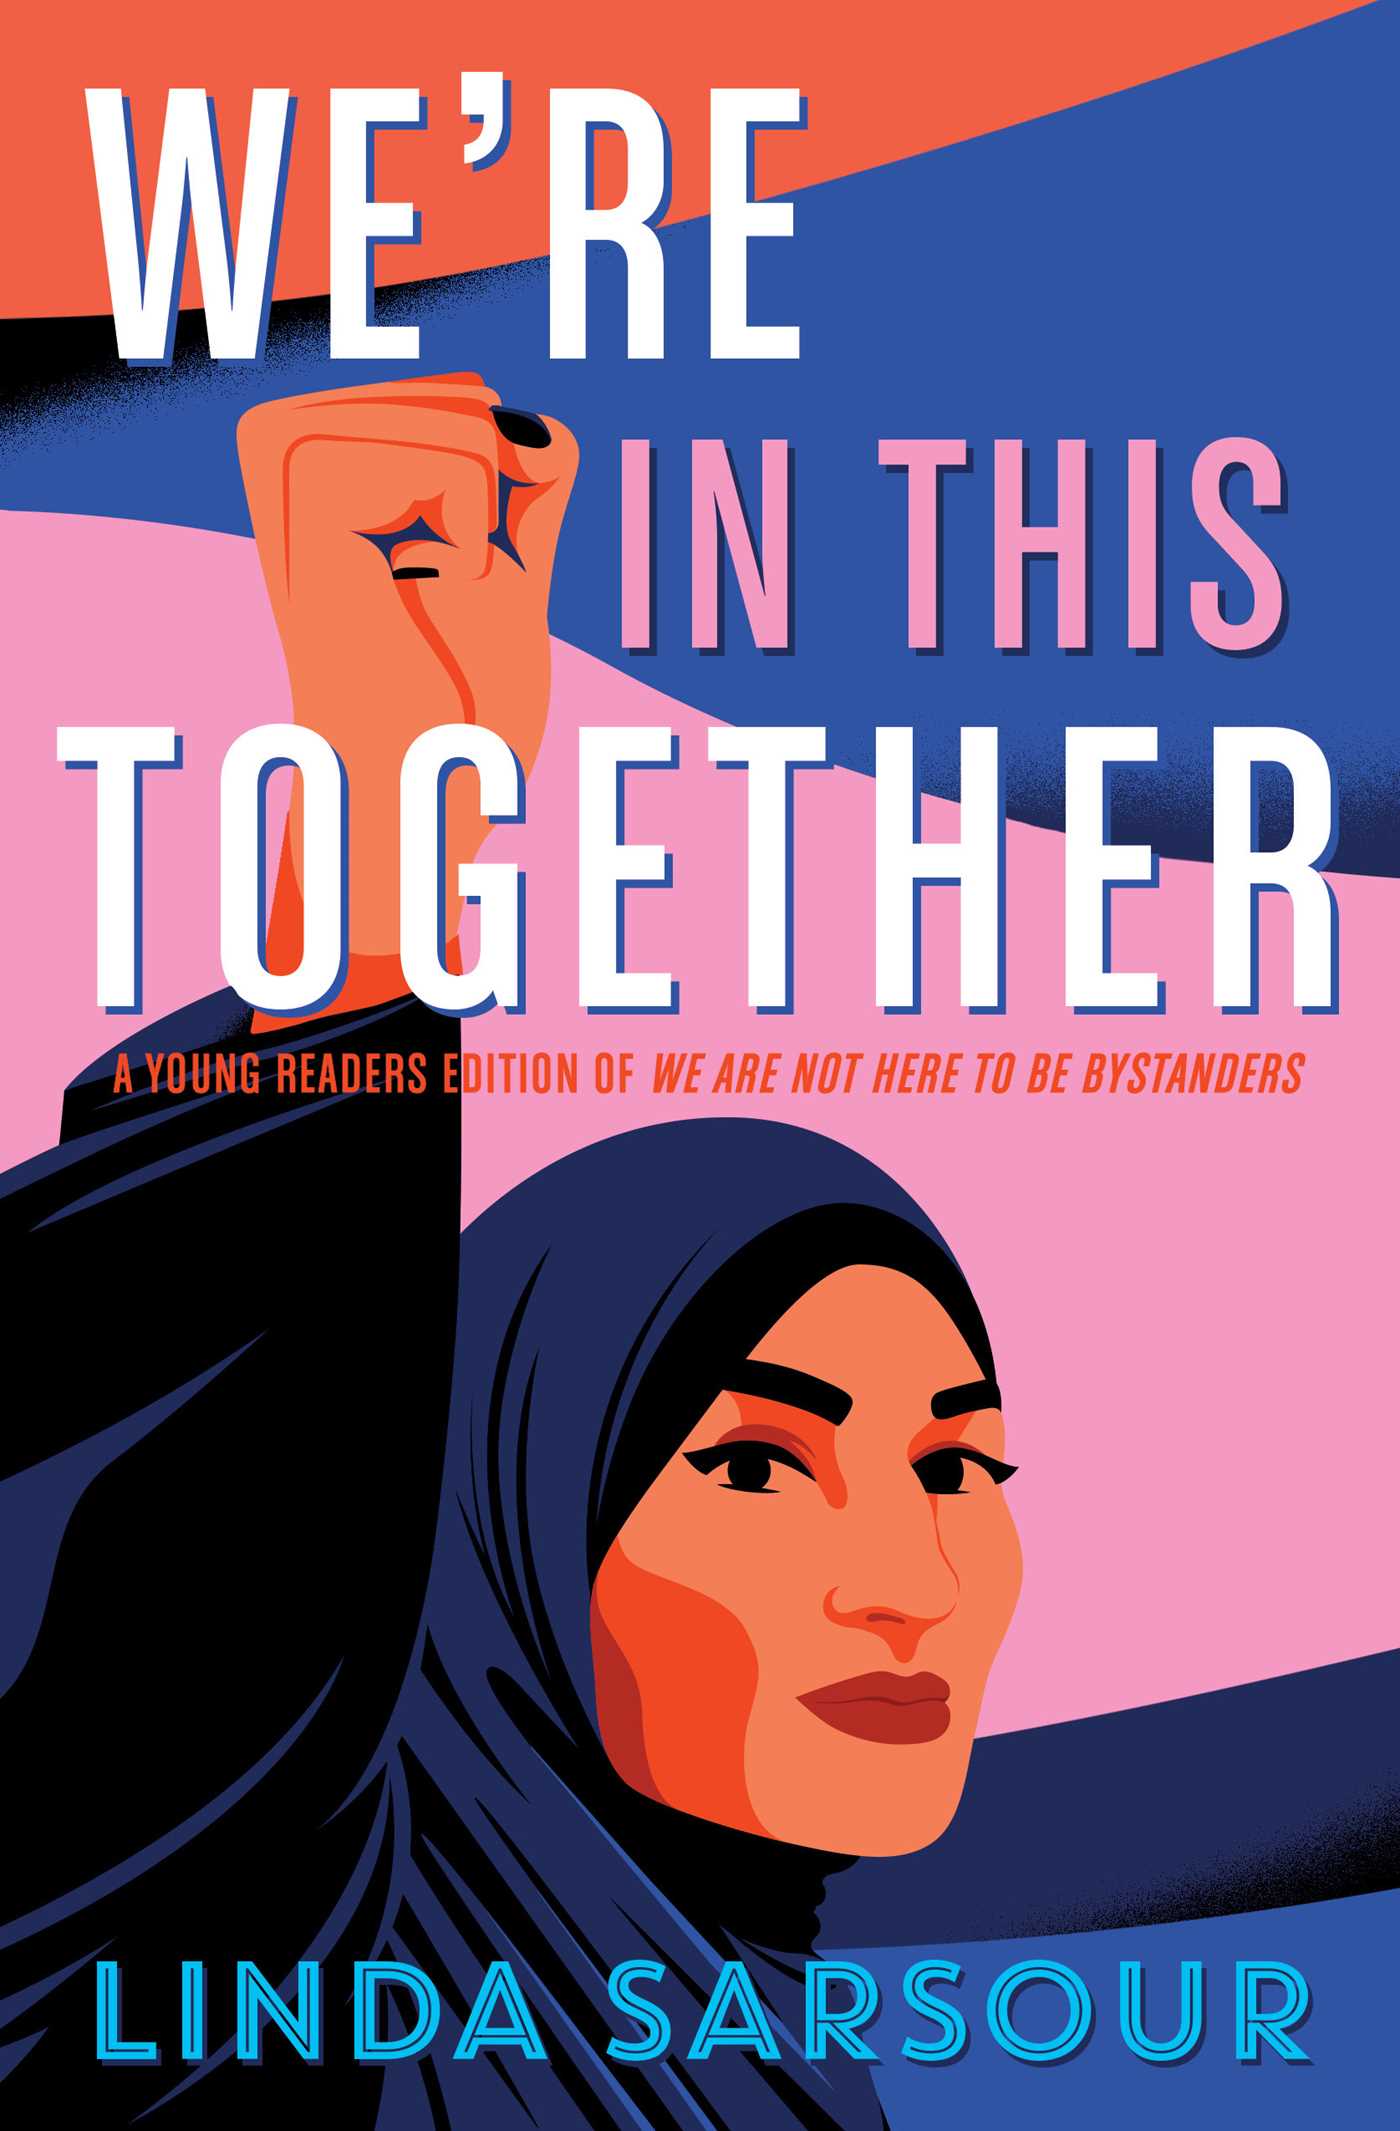 Image for "We're in This Together"